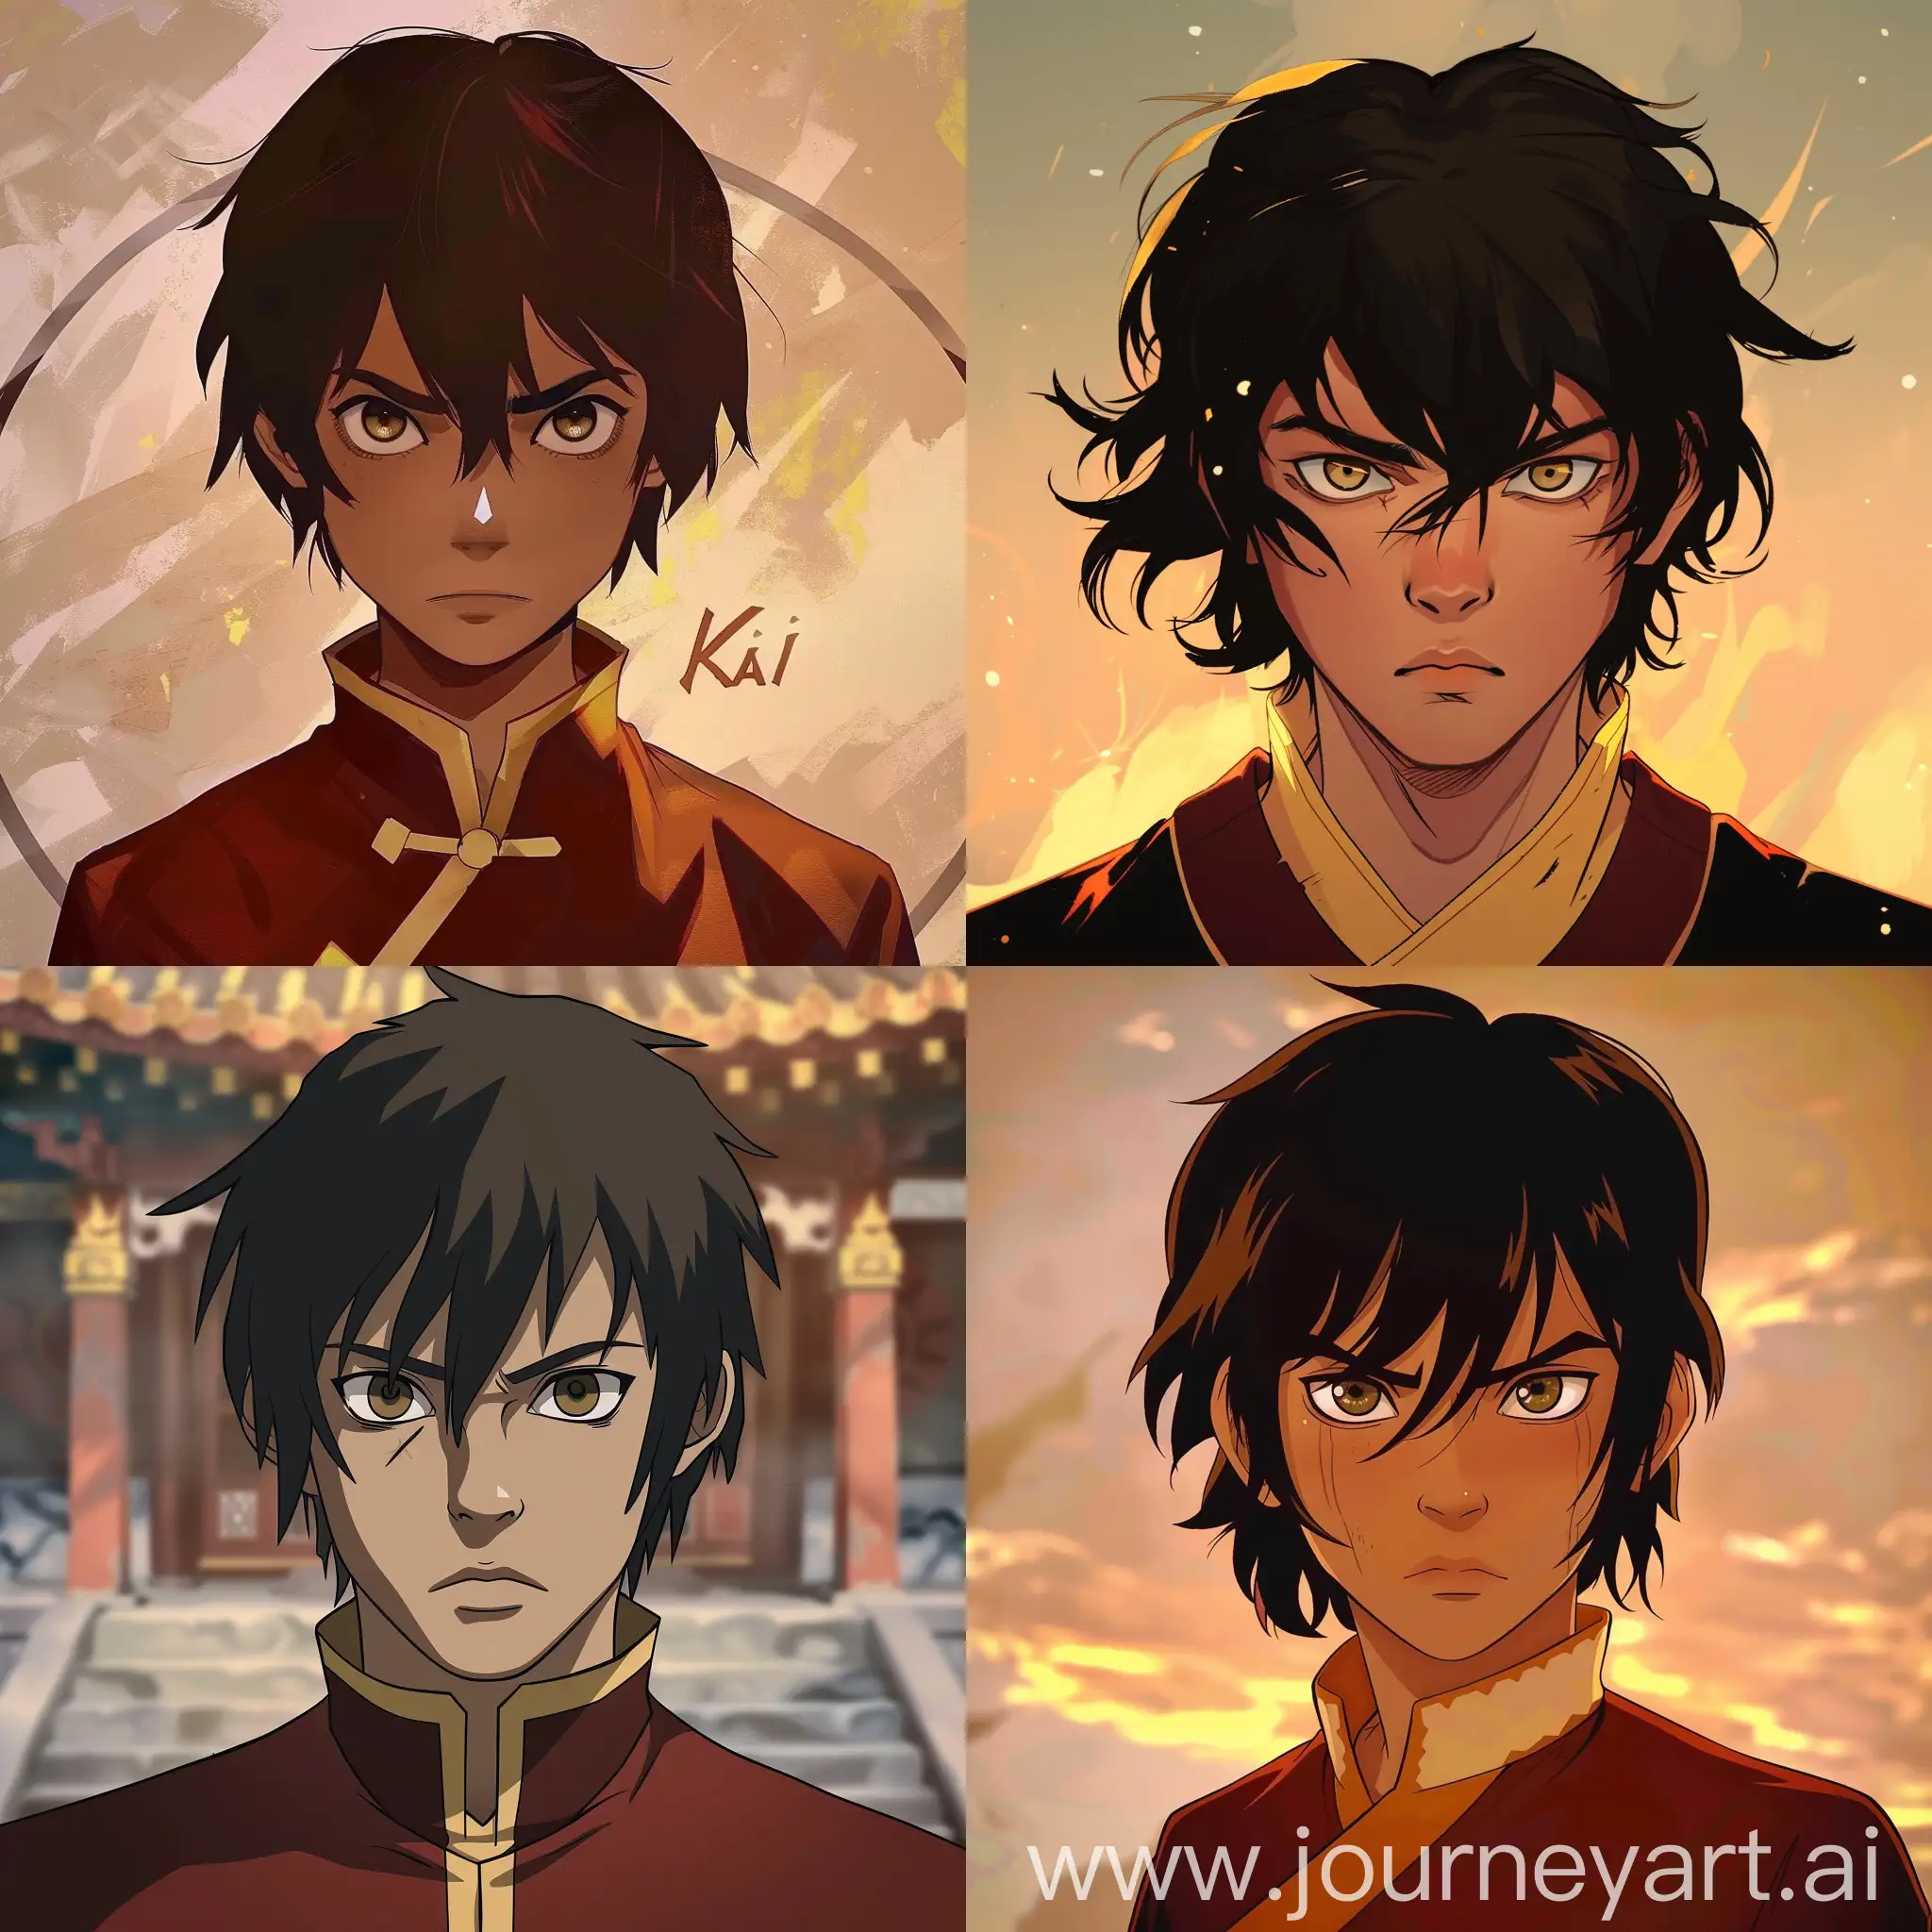 Name: Kai Age: 13 Description: Kai is a young Fire Nation citizen with a rebellious streak. His hazel eyes shine with determination and a deep-seated belief in a different future for his nation. Despite his black hair and Fire Nation heritage, Kai opposes the oppressive rule of Fire Lord Ozai. He believes in the prosperity of the Fire Nation through coexistence with other nations rather than through conquest and tyranny.  Kai's outlook sets him apart from many of his peers. While he respects the traditions and culture of the Fire Nation, he also recognizes the value of harmony and understanding among all nations. He dreams of a Fire Nation where people from all walks of life can live together in peace, where benders and non-benders alike can thrive.  Kai is confrontational in his approach to achieving peace, believing that strength and resolve are necessary to bring about meaningful change. He is not afraid to challenge authority or to stand up for what he believes is right, even if it means putting himself in danger. Despite his confrontational nature, Kai is not violent. He believes in using his strength to protect others and to create a better world for future generations.